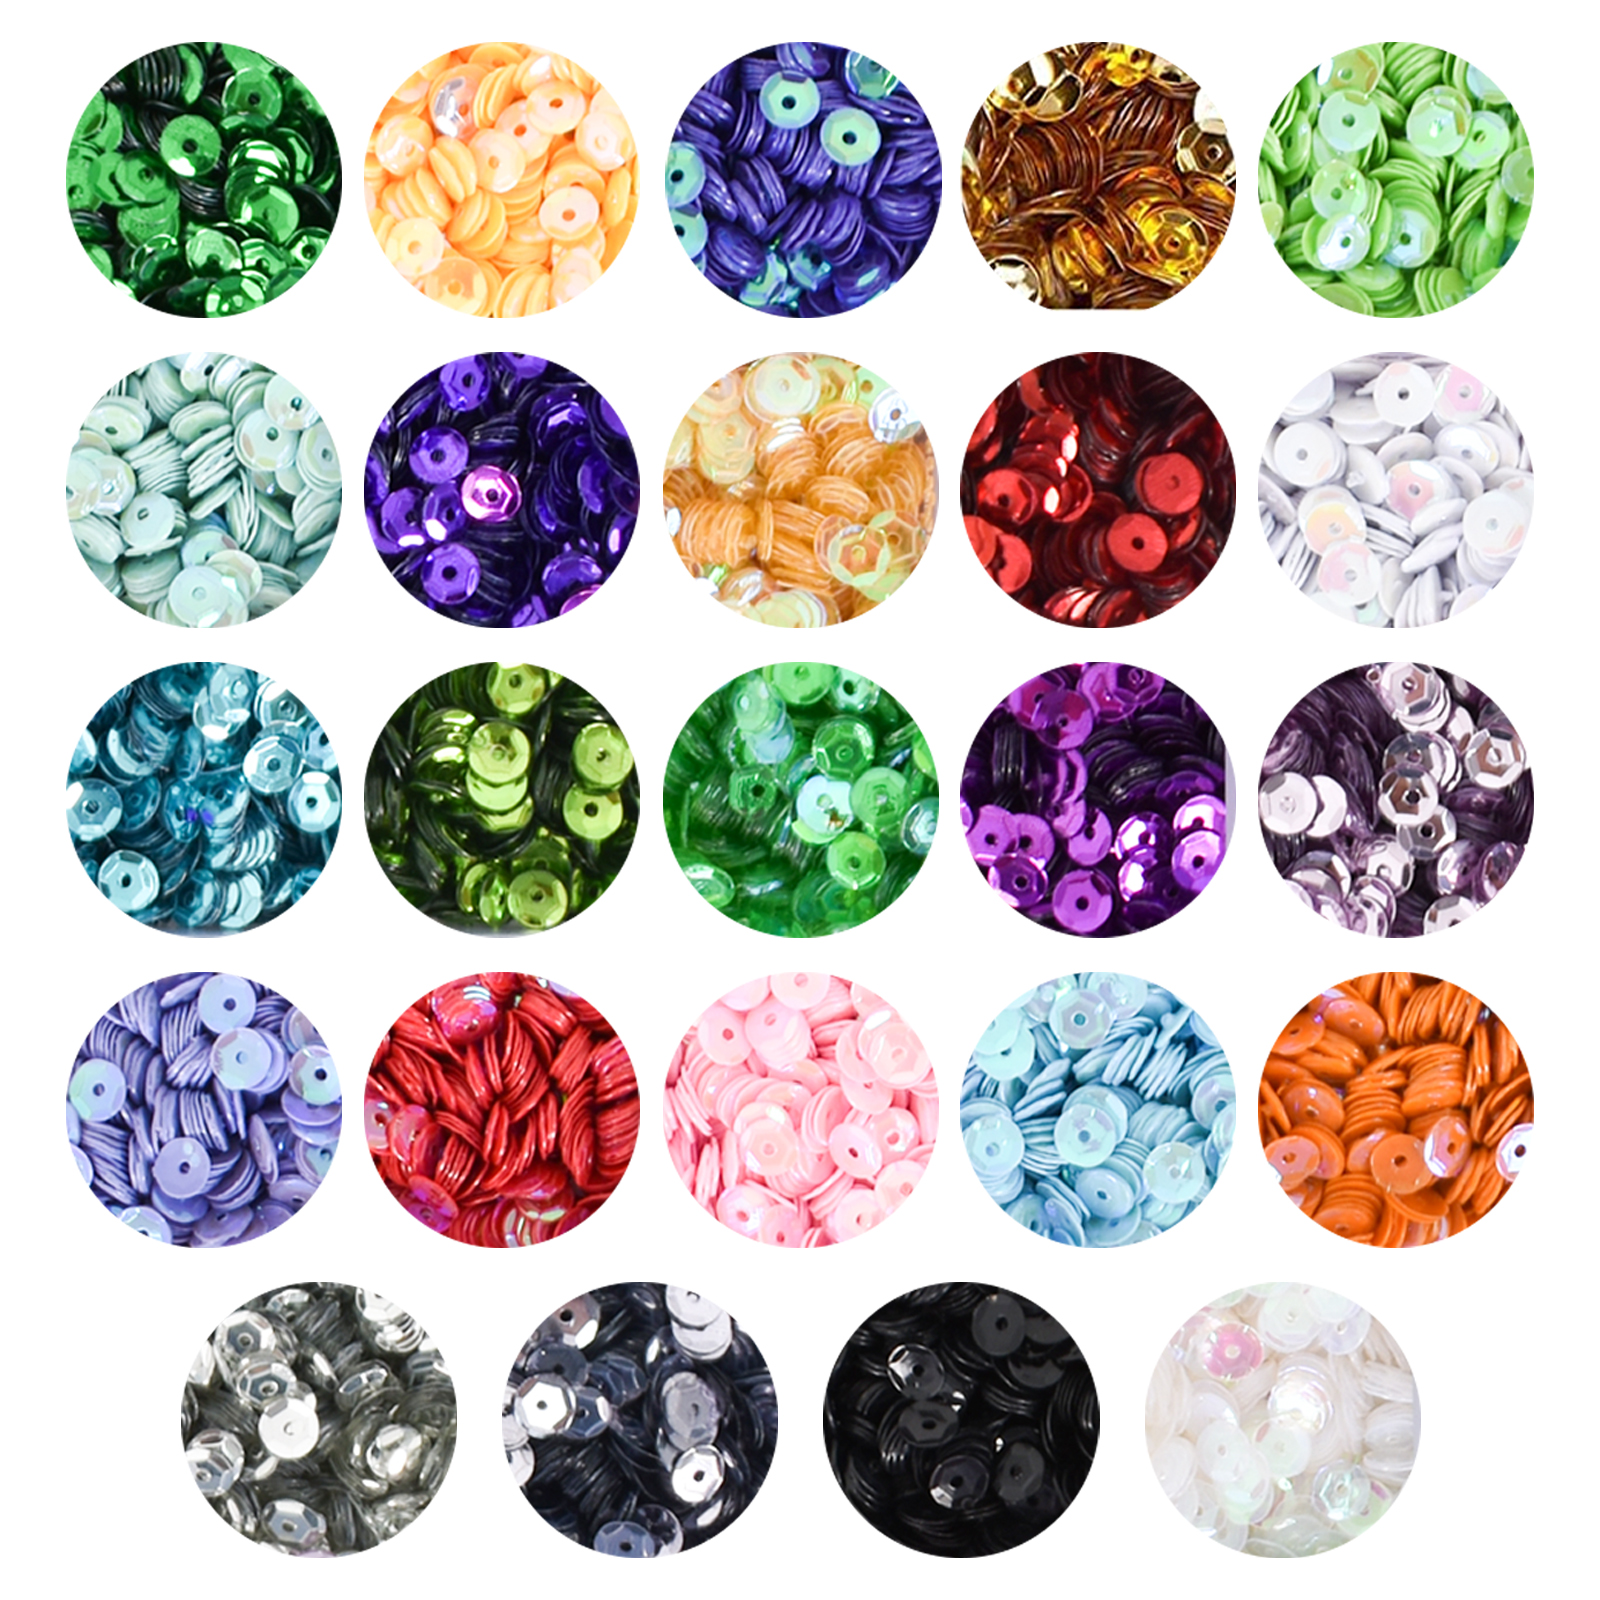 10 Bags of Large Sequins for Crafts Loose Sequins Round Sequins DIY Sewing Sequins, Size: 3x3cm